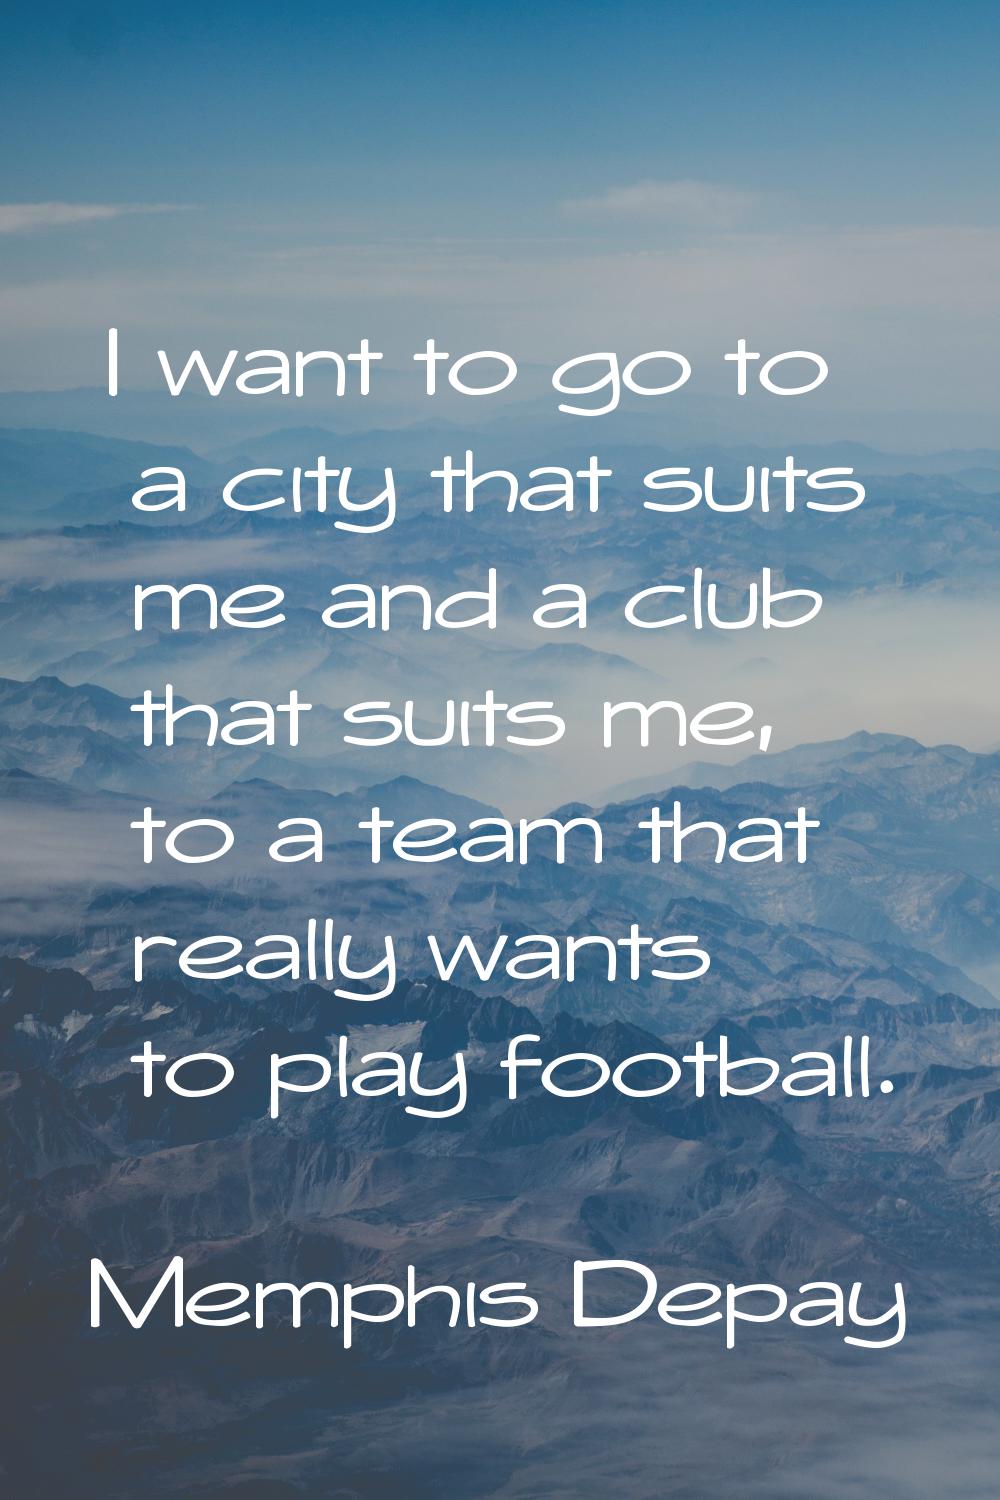 I want to go to a city that suits me and a club that suits me, to a team that really wants to play 